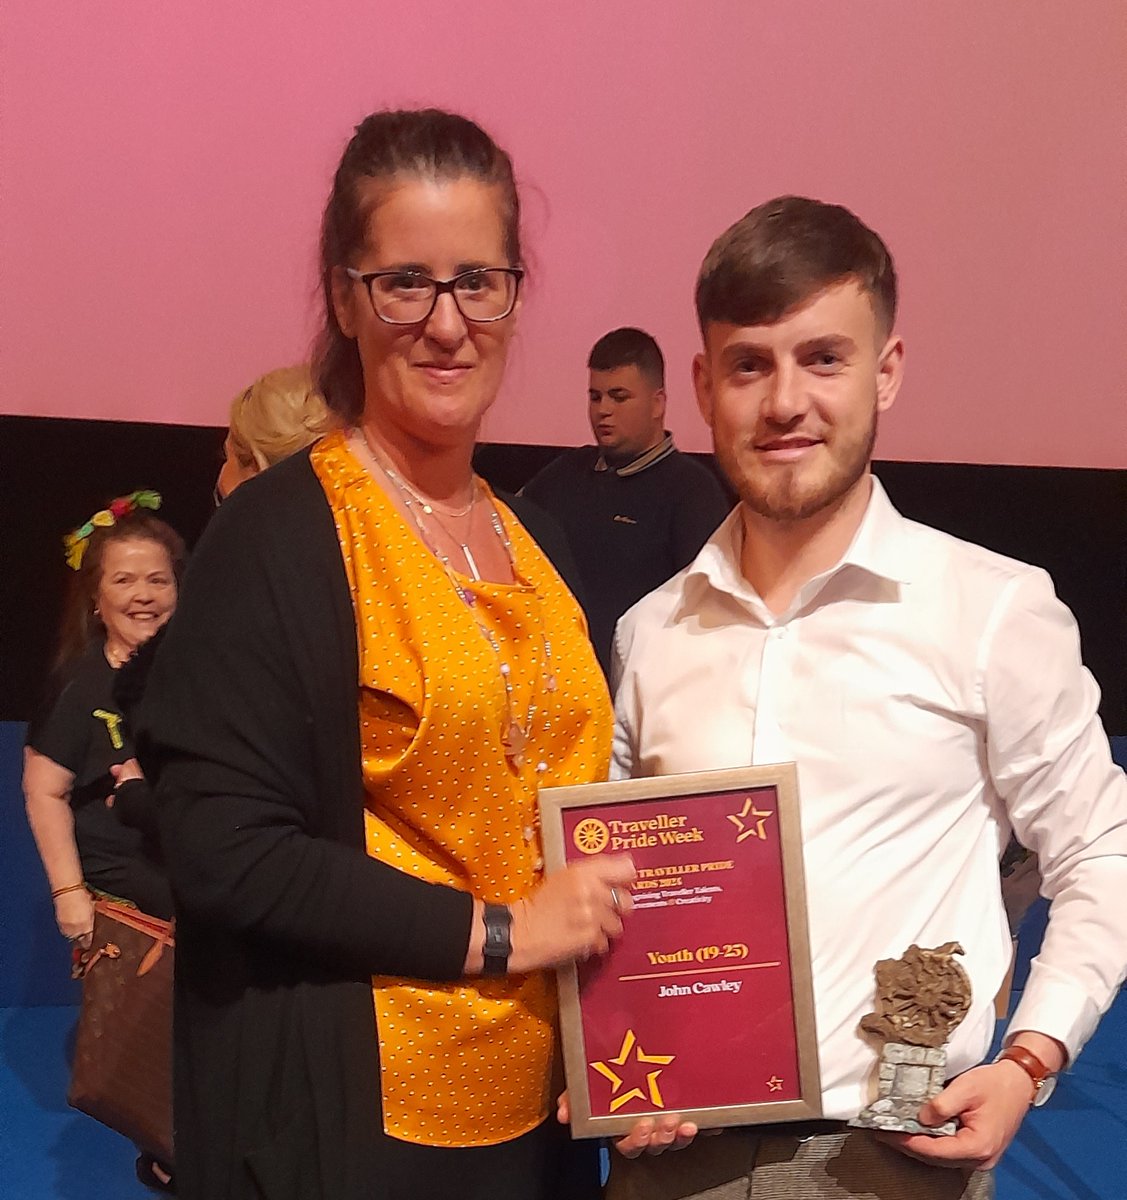 👏Congratulations to John Crawley, at today's #TravellerPride Awards. NYCI's Alison Fox was on hand to present him with his well deserved youth award at today's event as part of #travellerprideweek celebrations. #TravellerPrideWeek2024 @itmtrav @PaveePoint @InvolveYouth